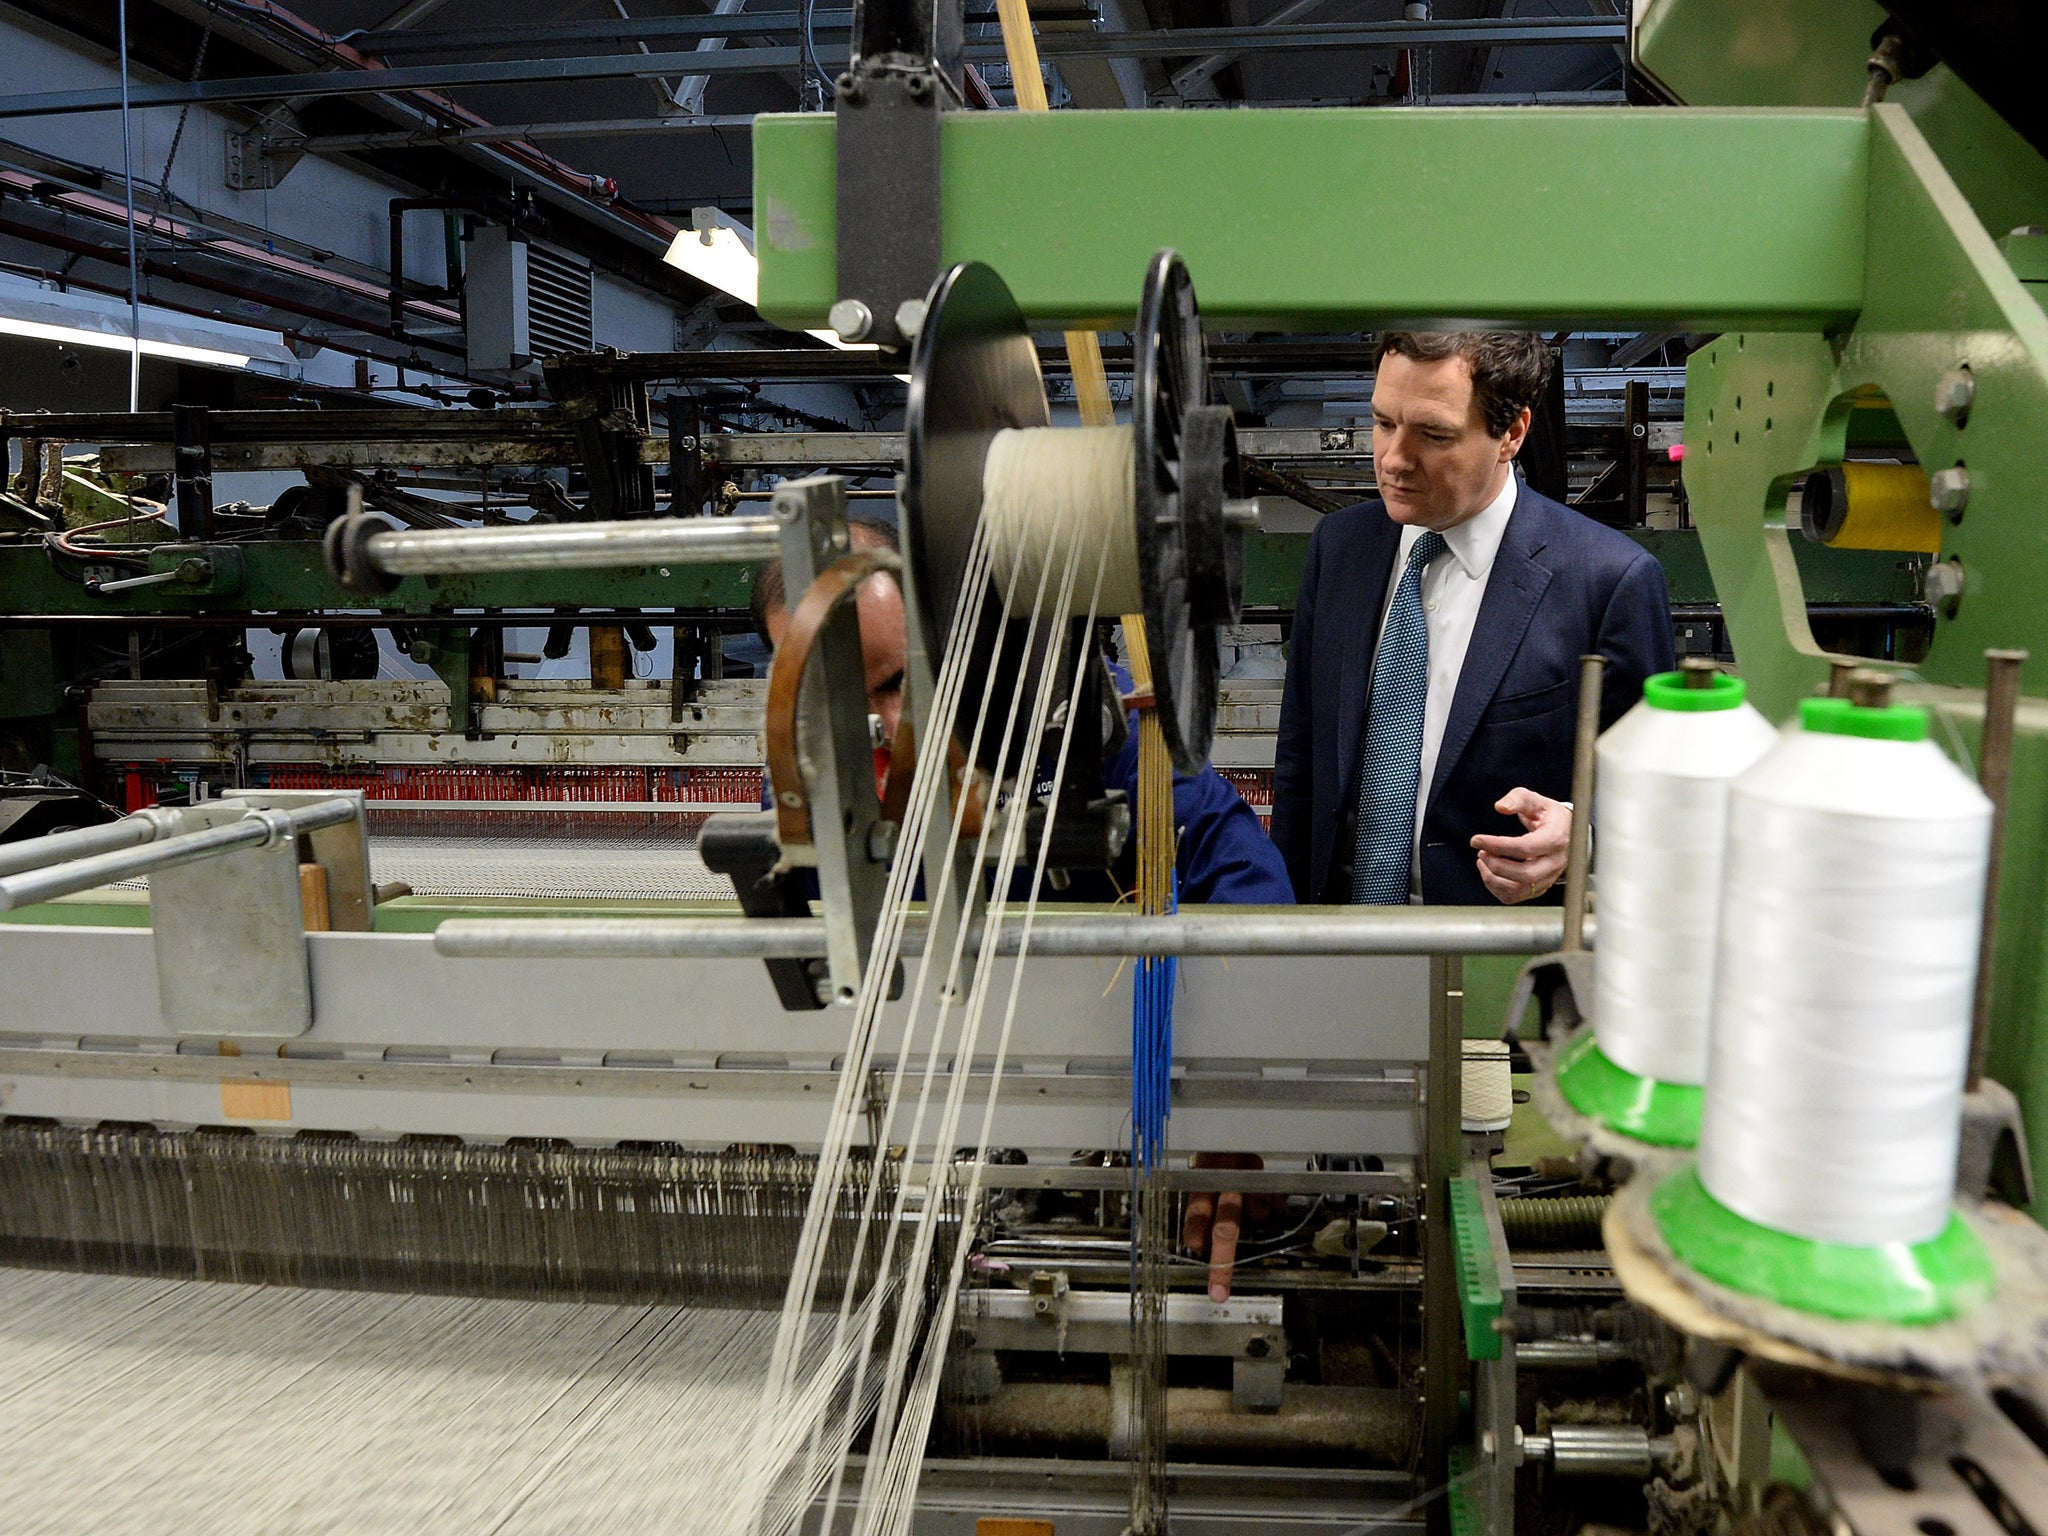 George Osborne during a visit to AW Hainsworth and Sons textile manufacturer in October. Y